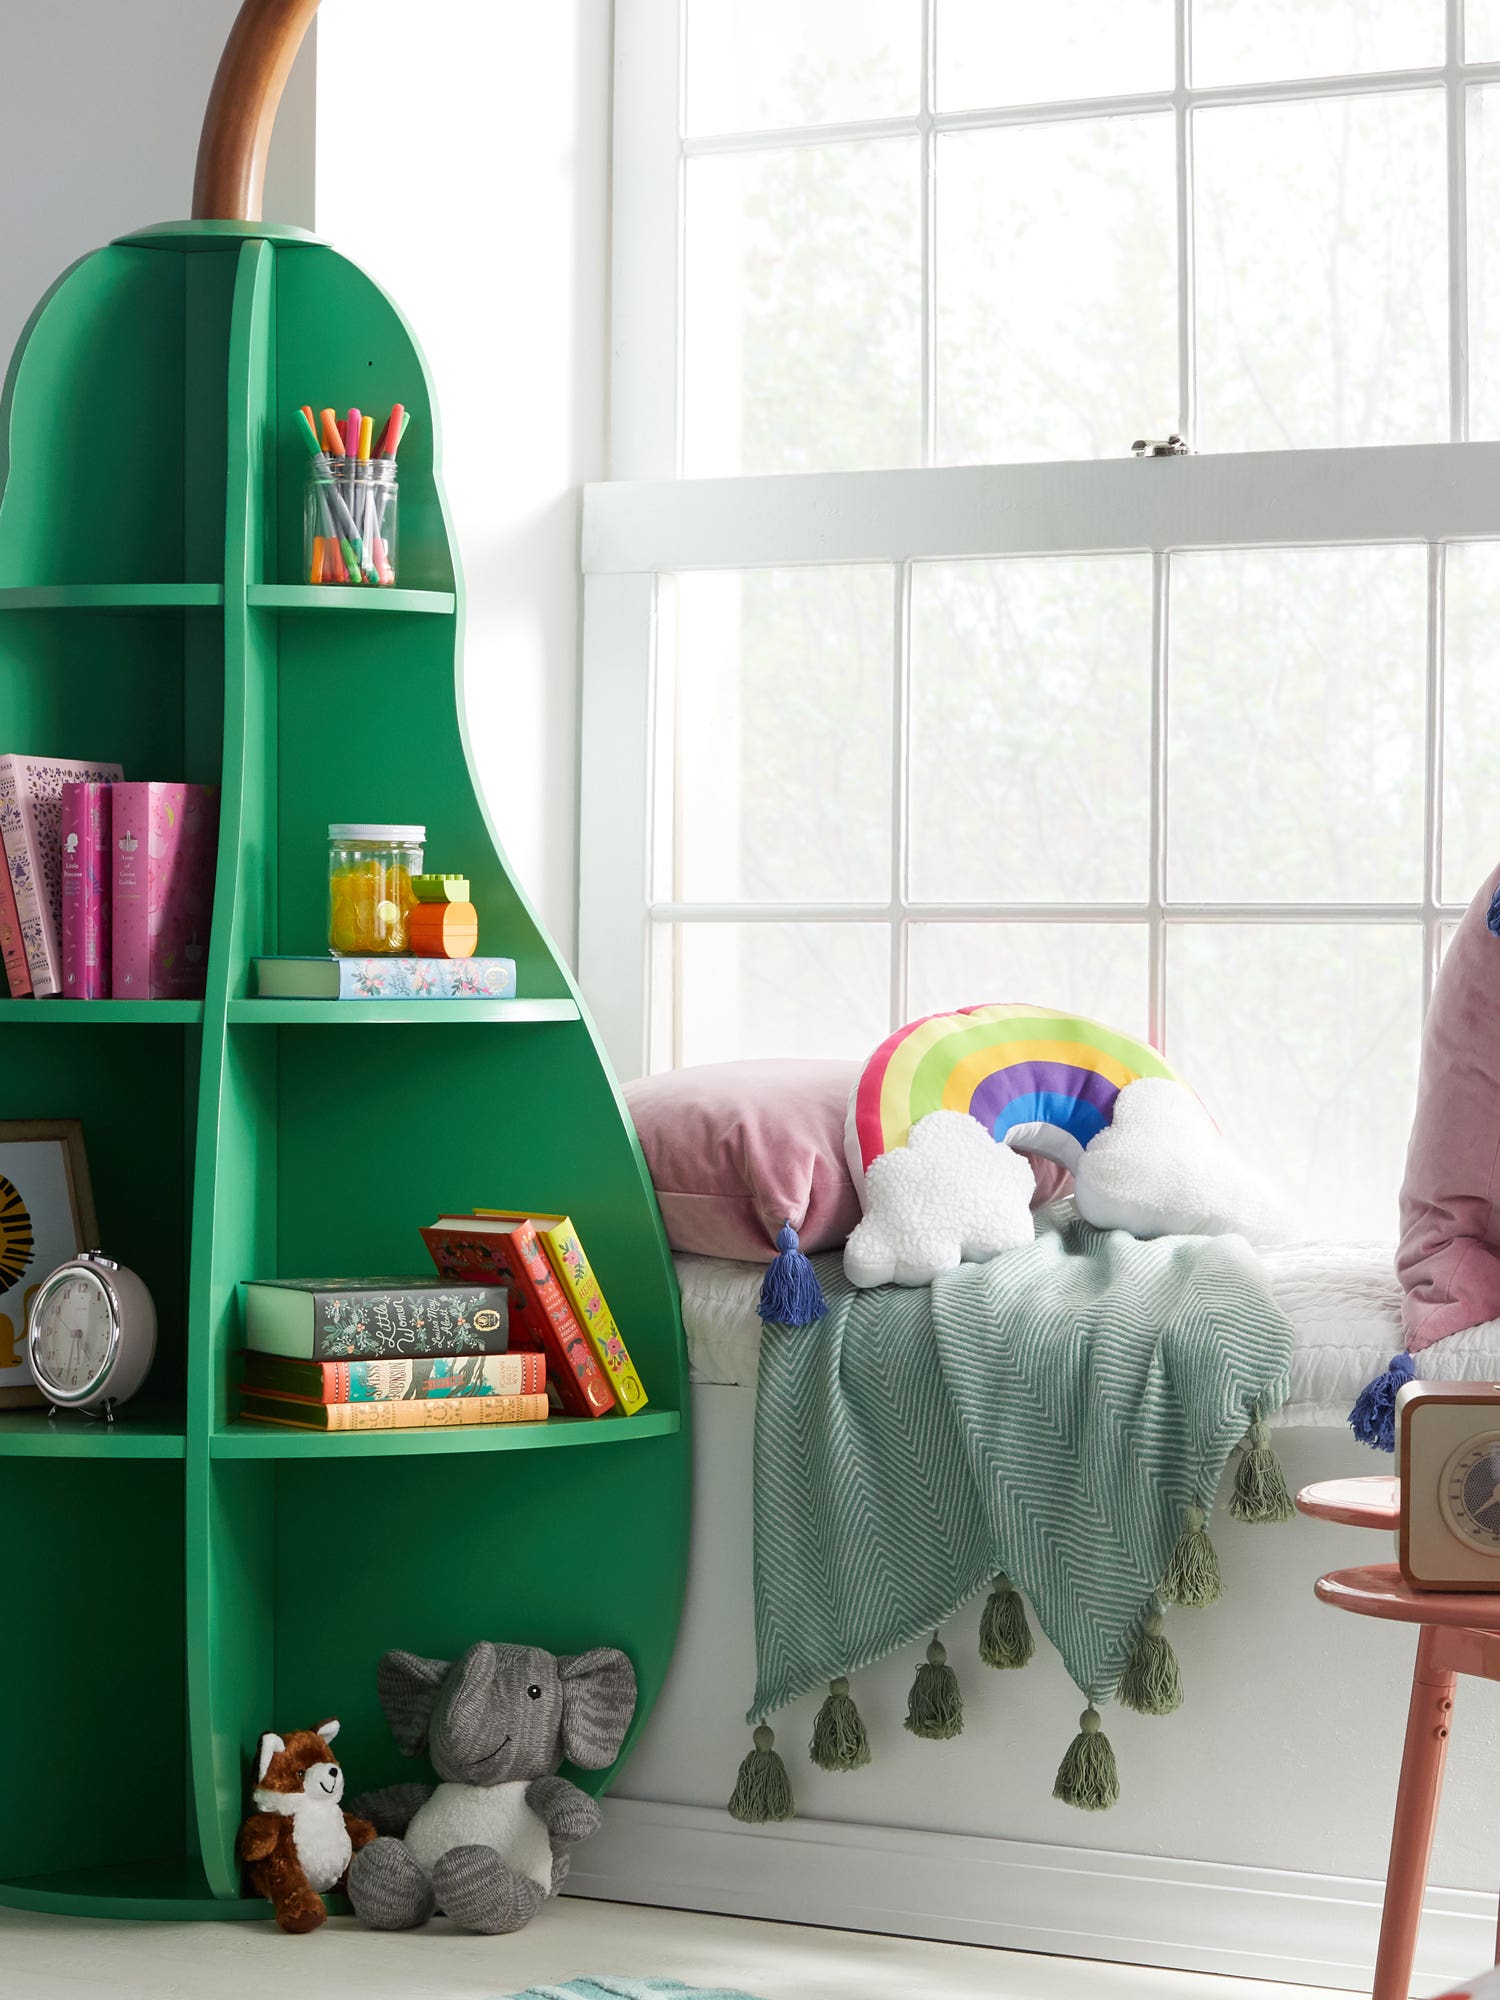 Design-Savvy Parents on the 45 Kids’ Products That Make Home a Creative Escape